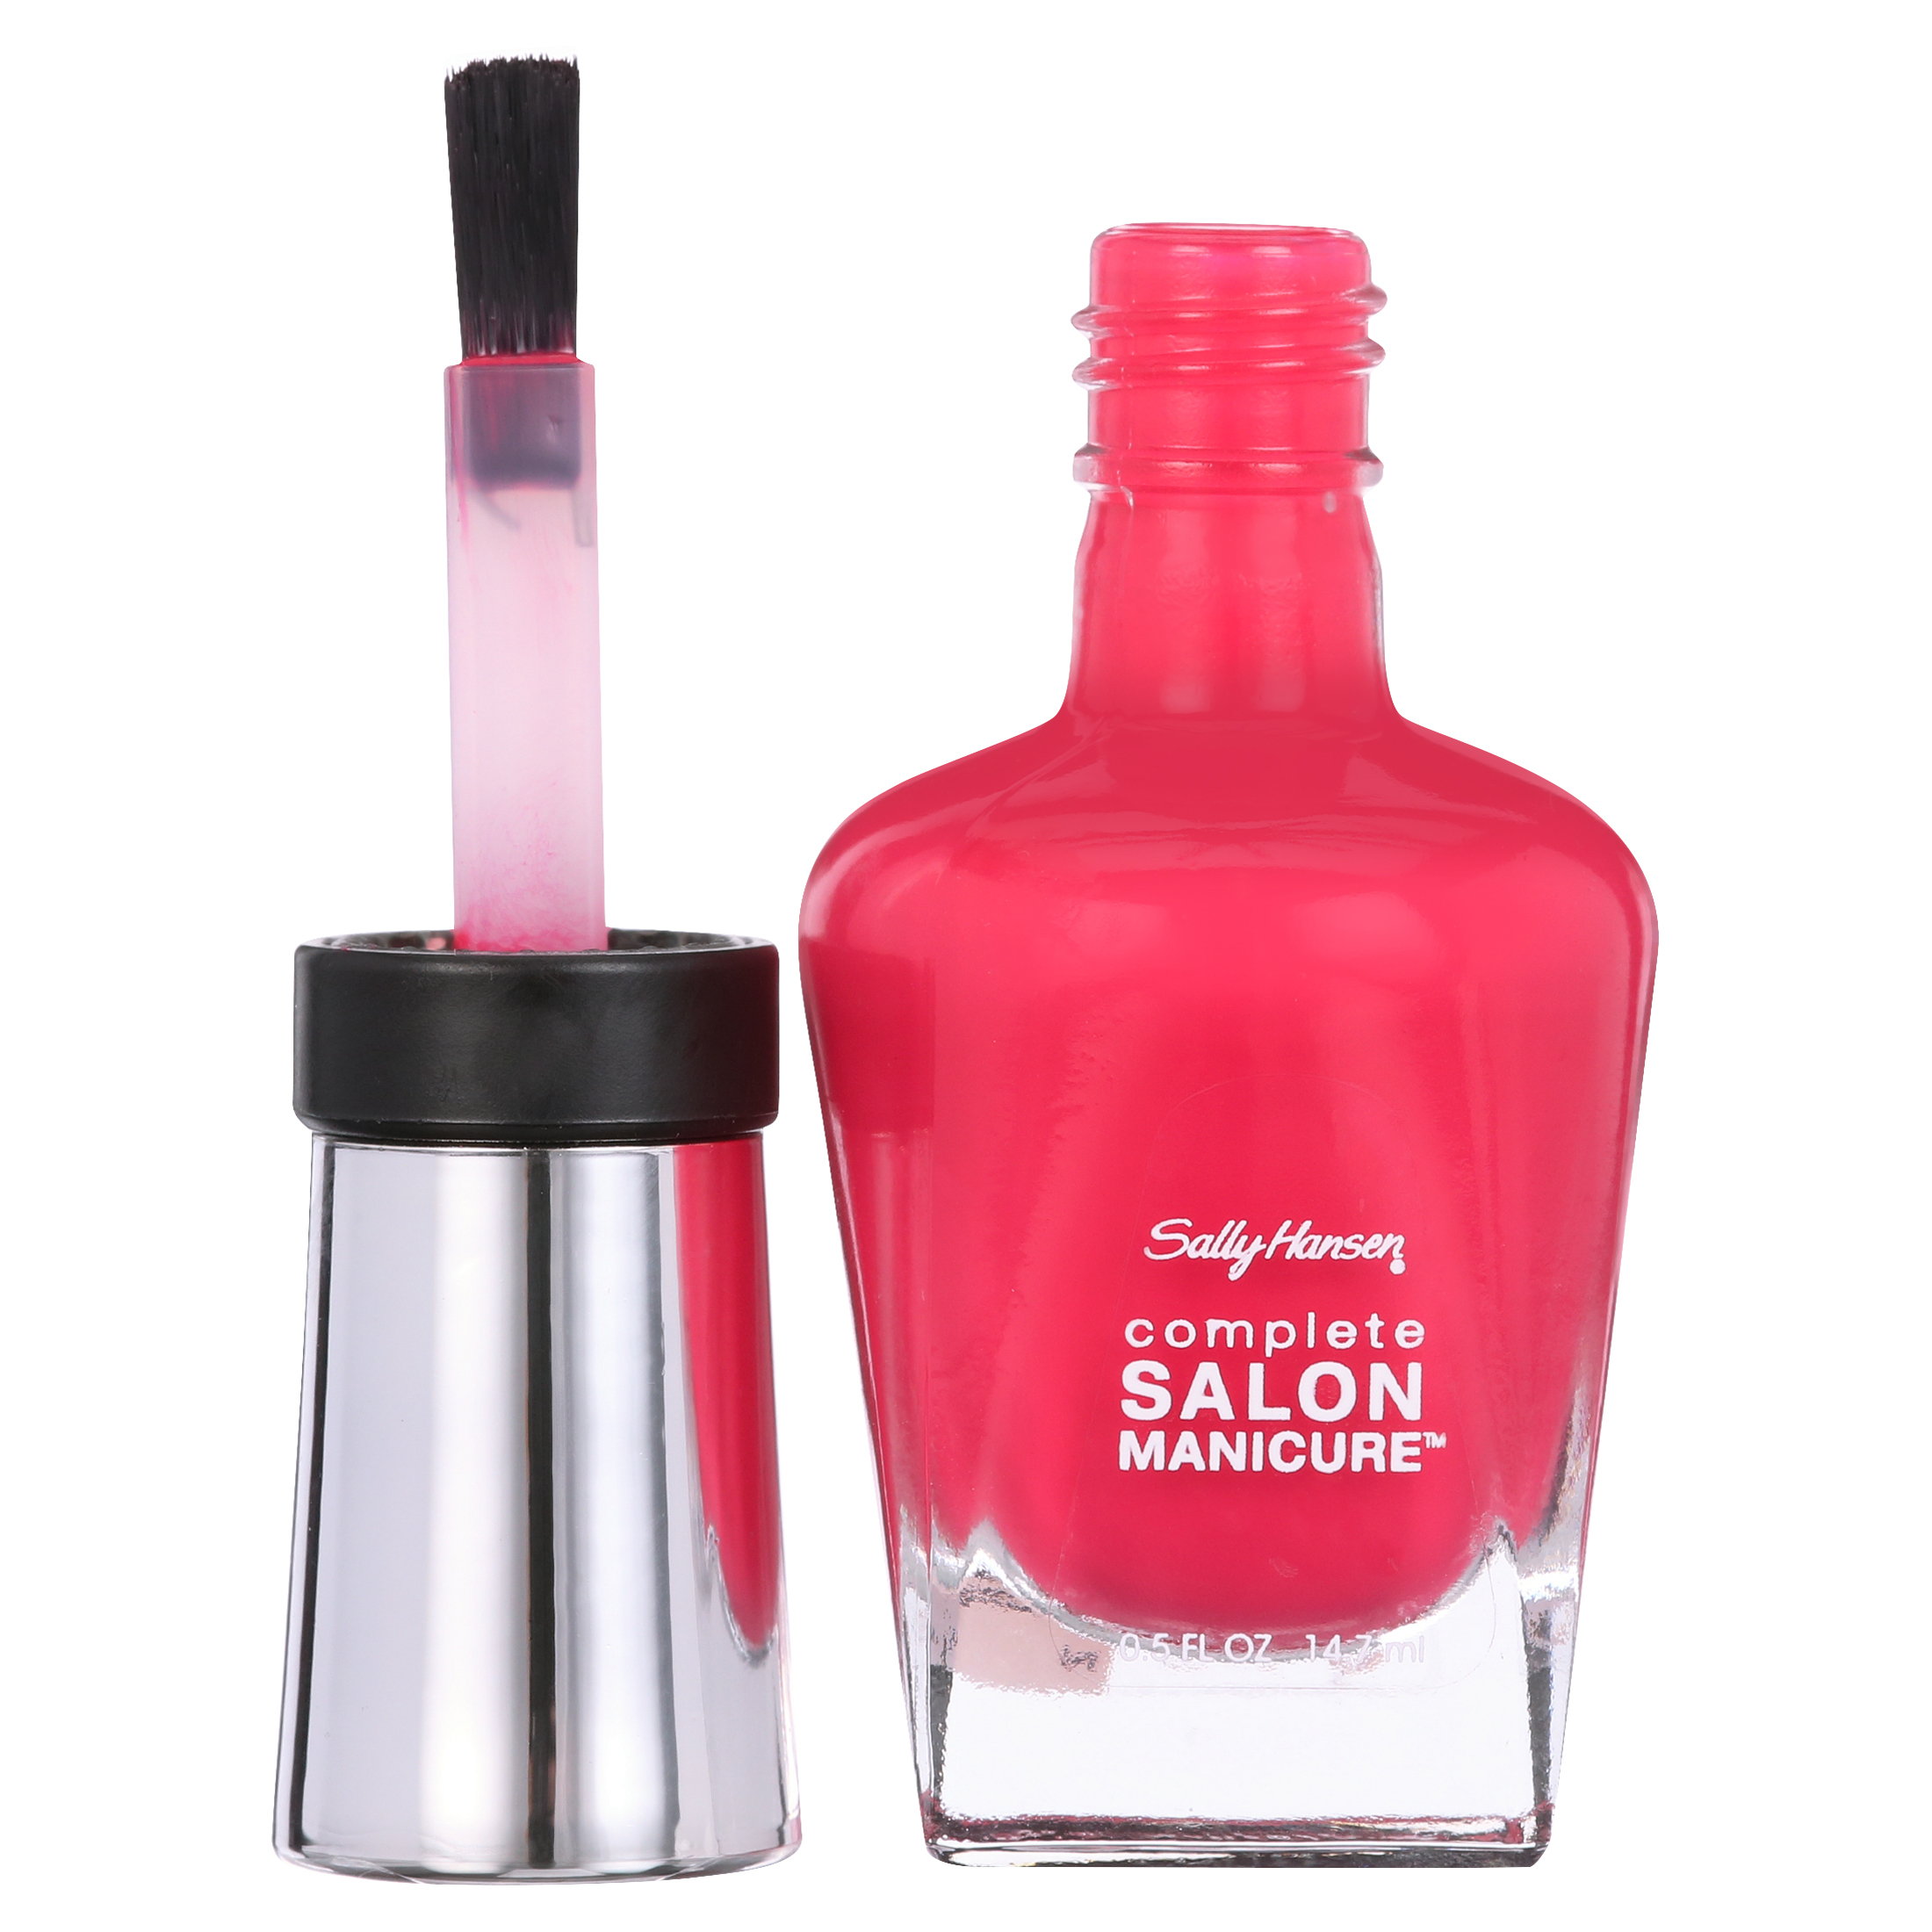 Sally Hansen Complete Salon Manicure Nail Color, Tickle Me Pink - image 12 of 15